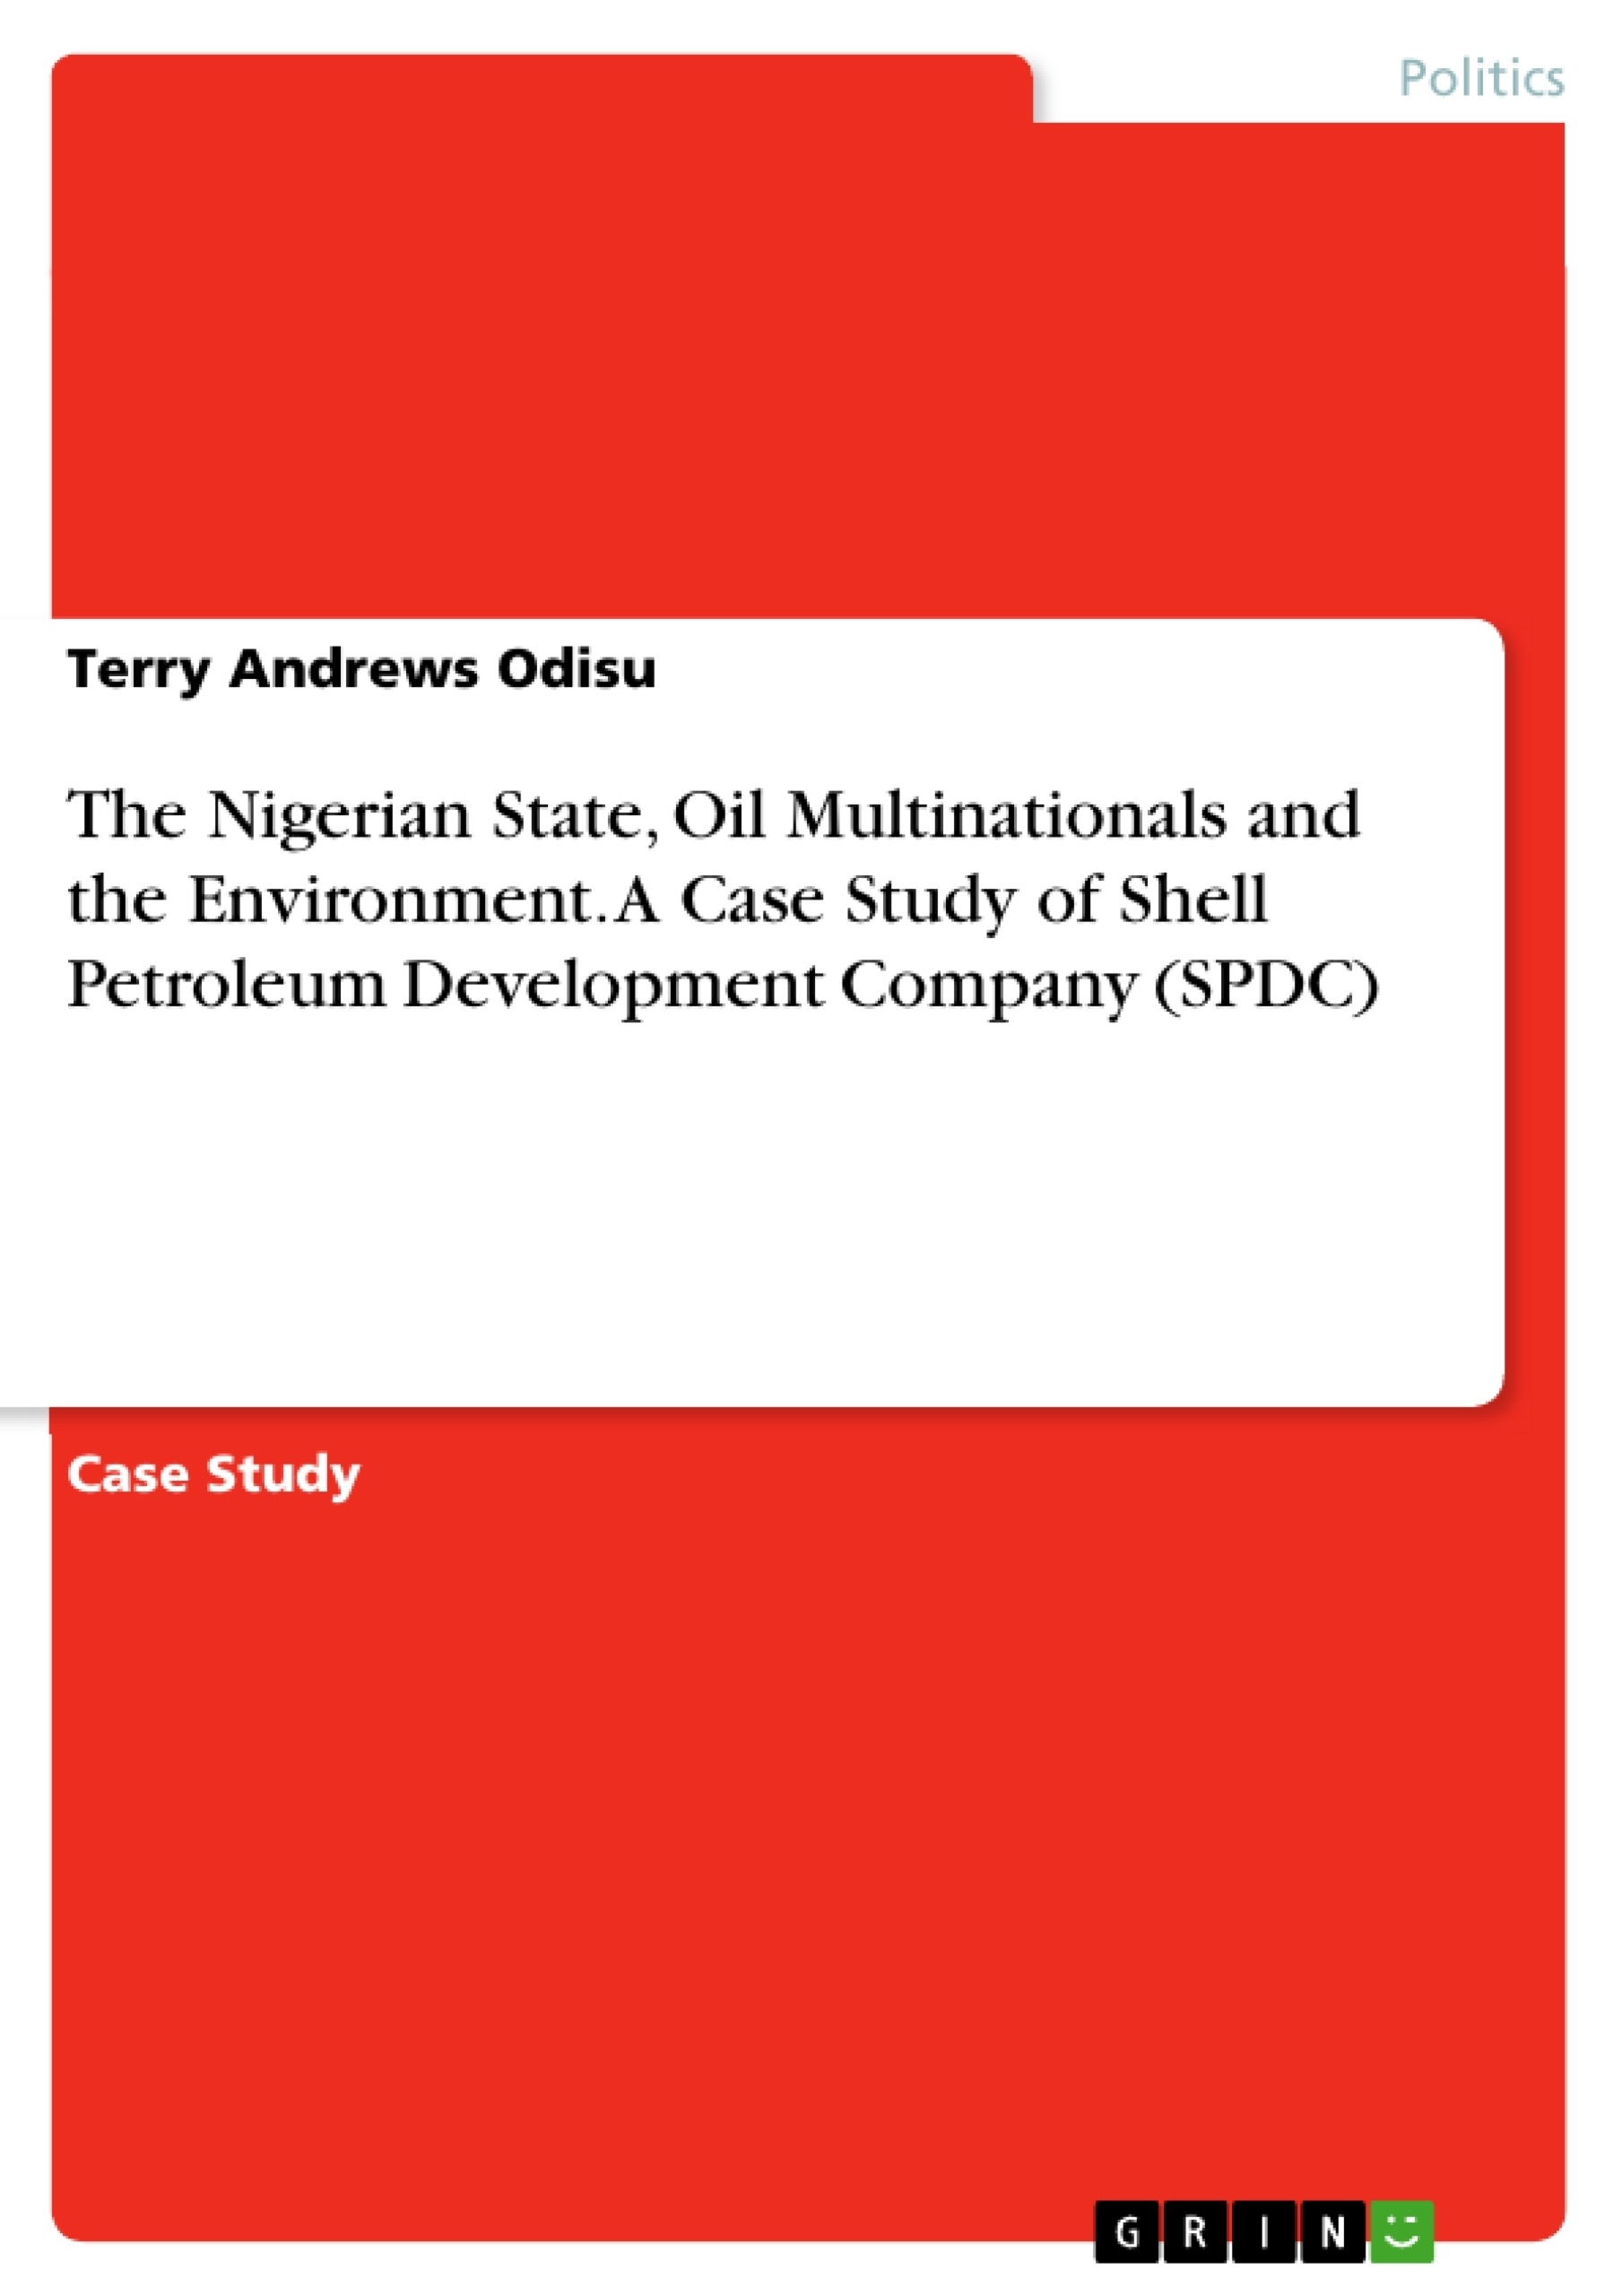 Título: The Nigerian State, Oil Multinationals and the Environment. A Case Study of Shell Petroleum Development Company (SPDC)